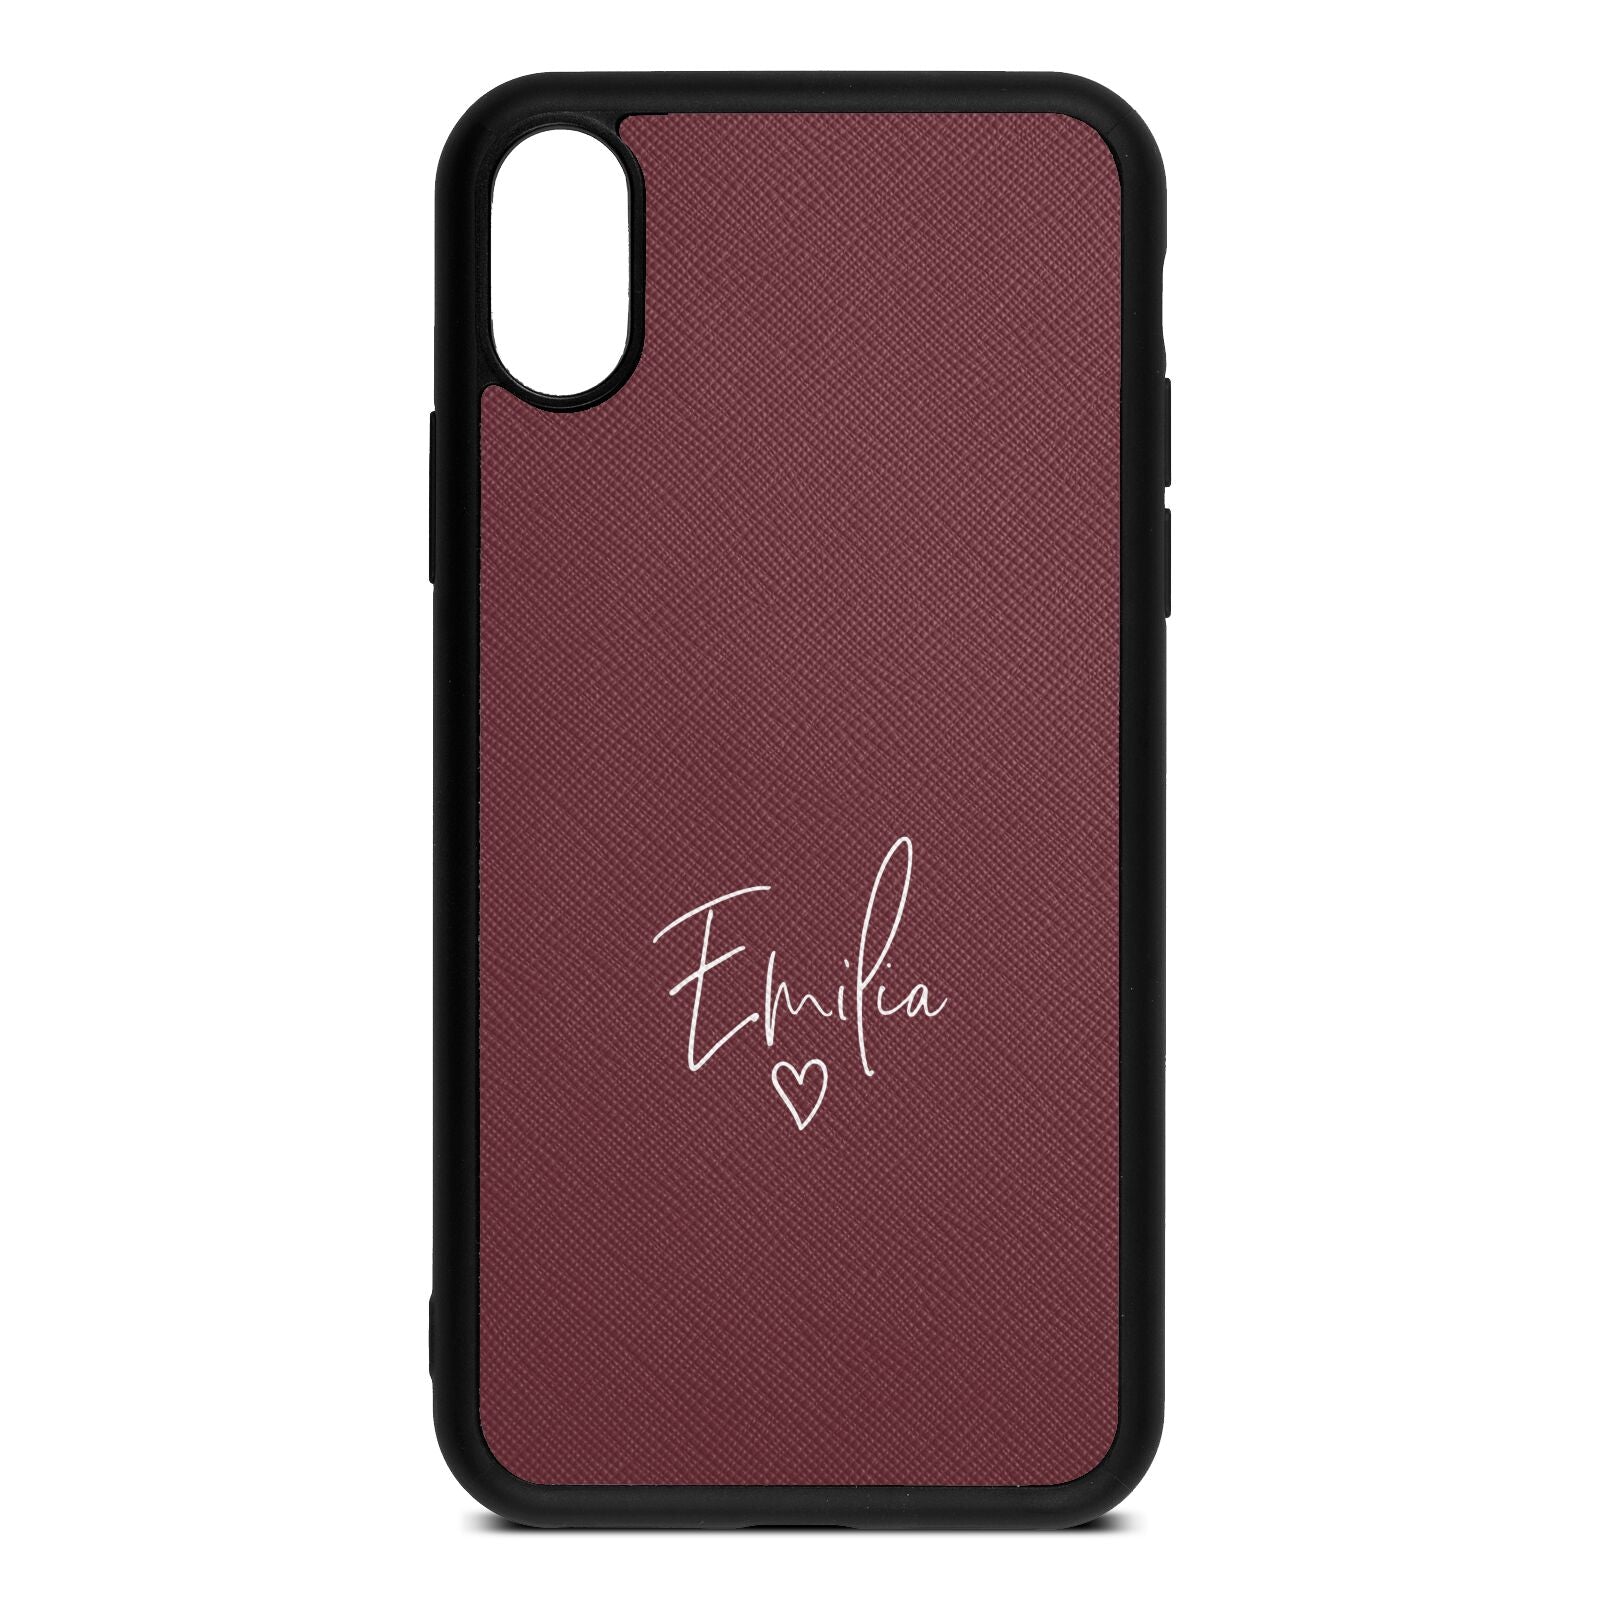 White Handwritten Name Transparent Rose Brown Saffiano Leather iPhone Xs Case